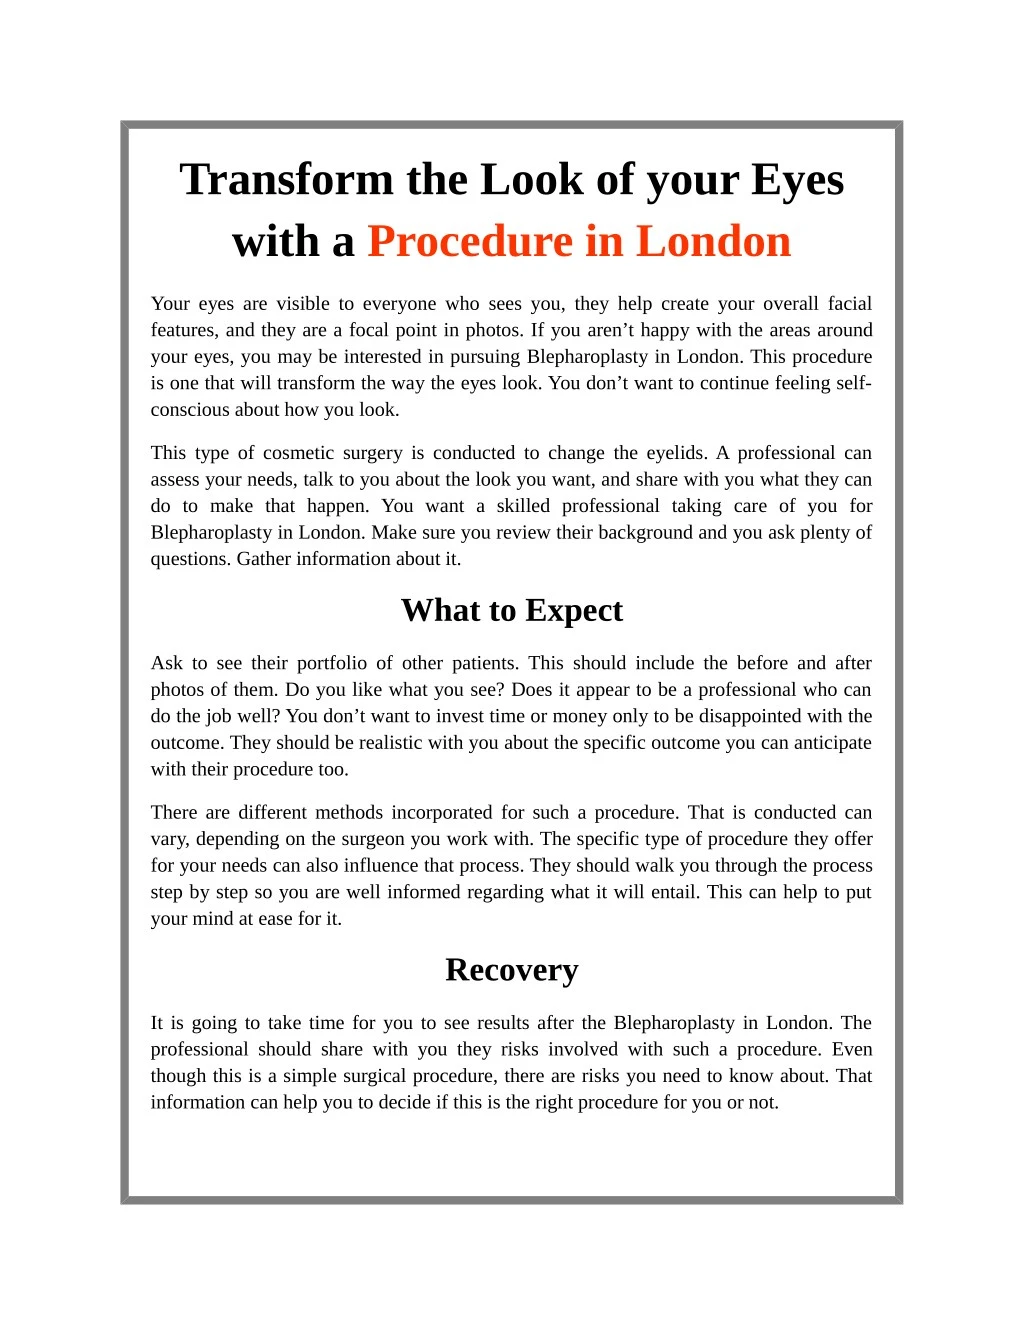 transform the look of your eyes with a procedure